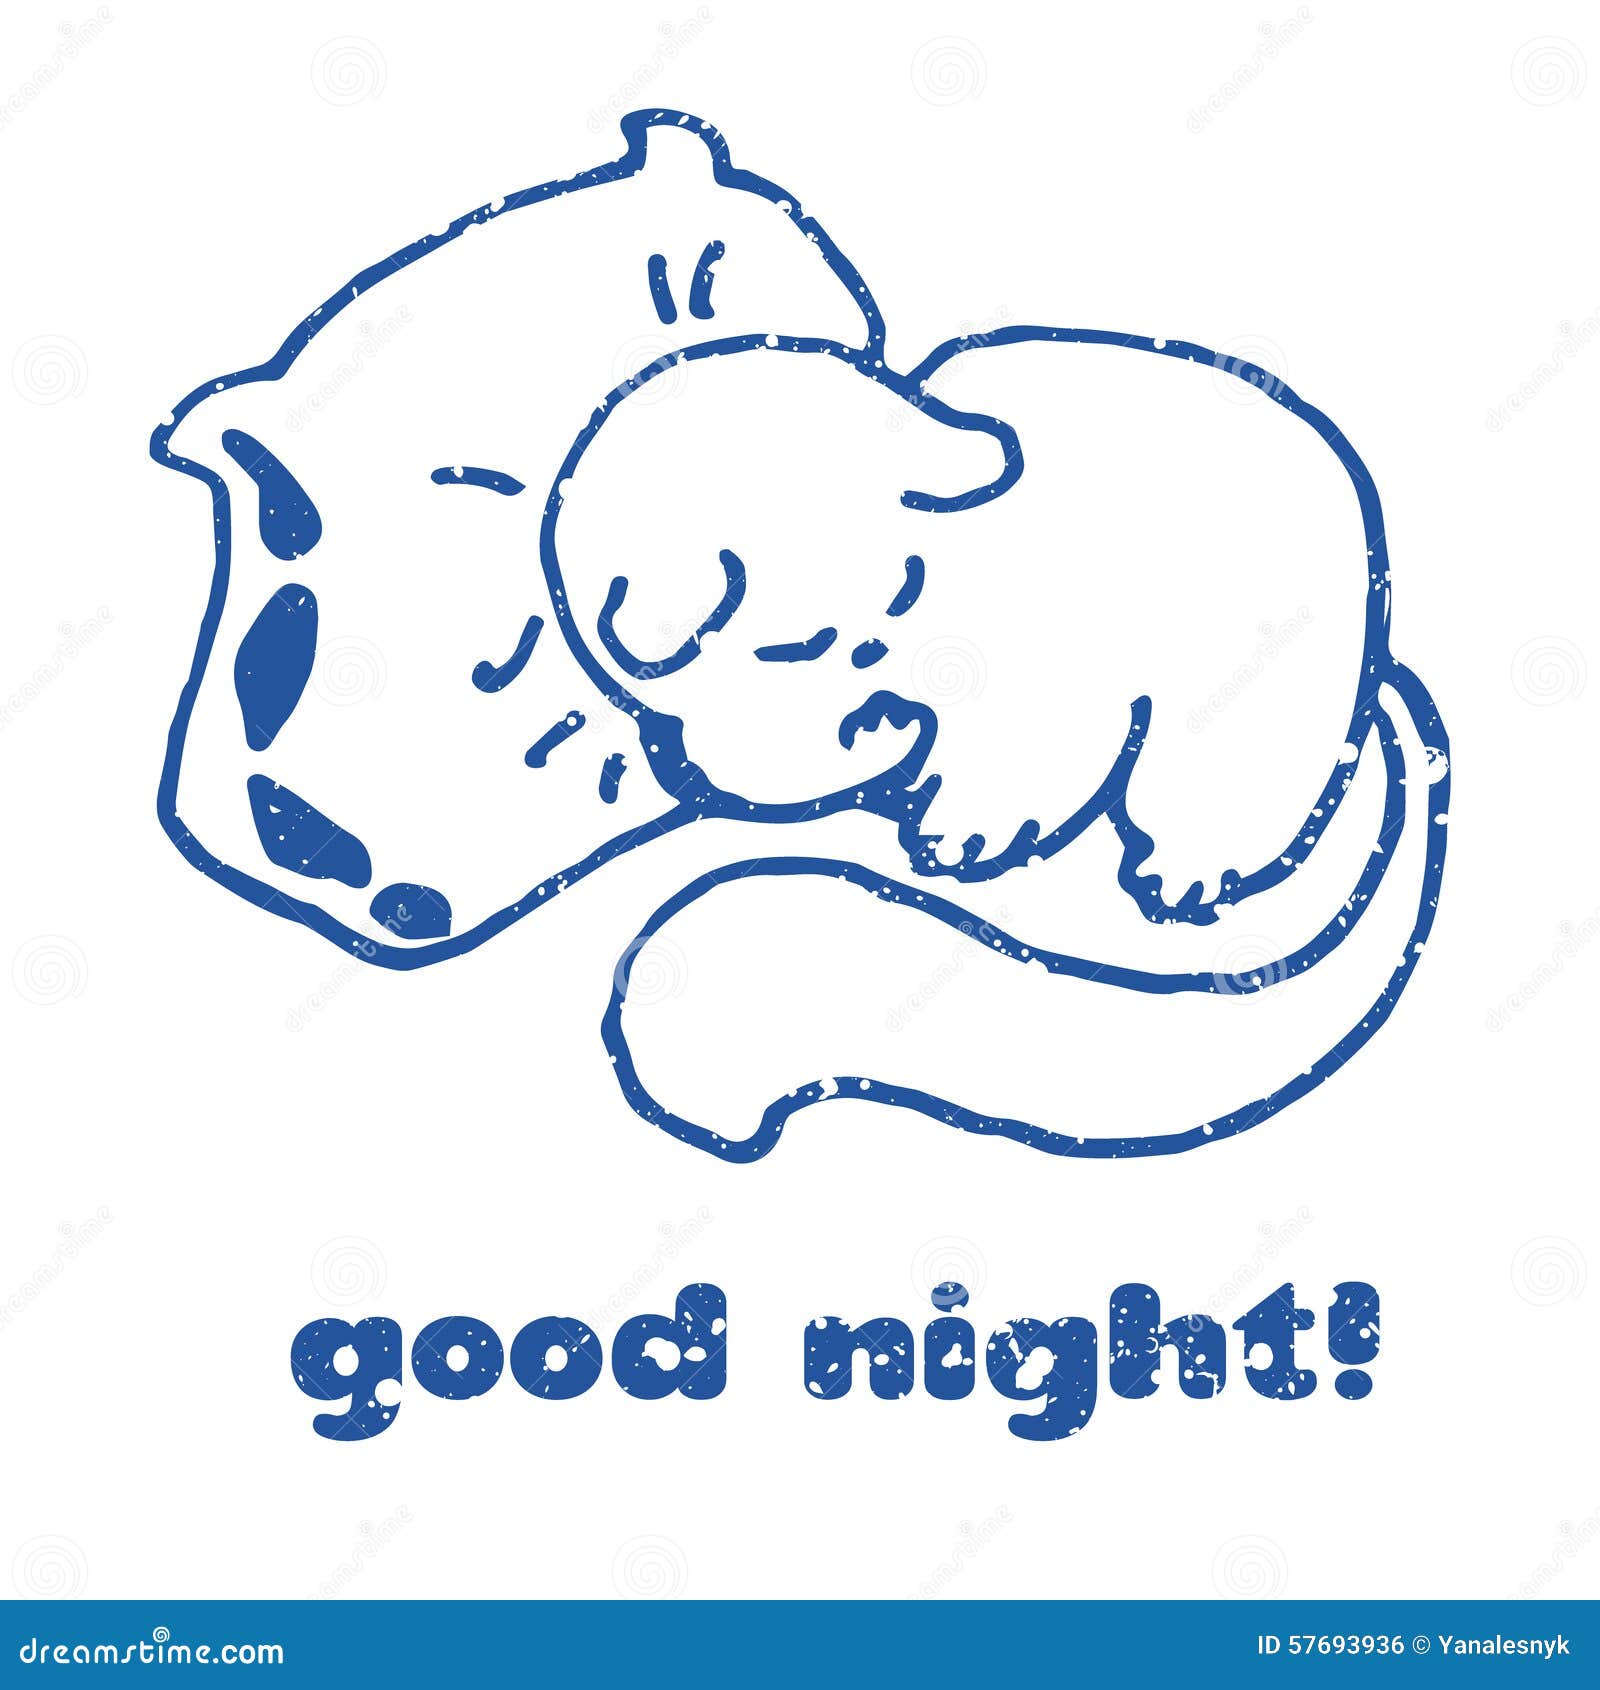 good night clipart free download - photo #7